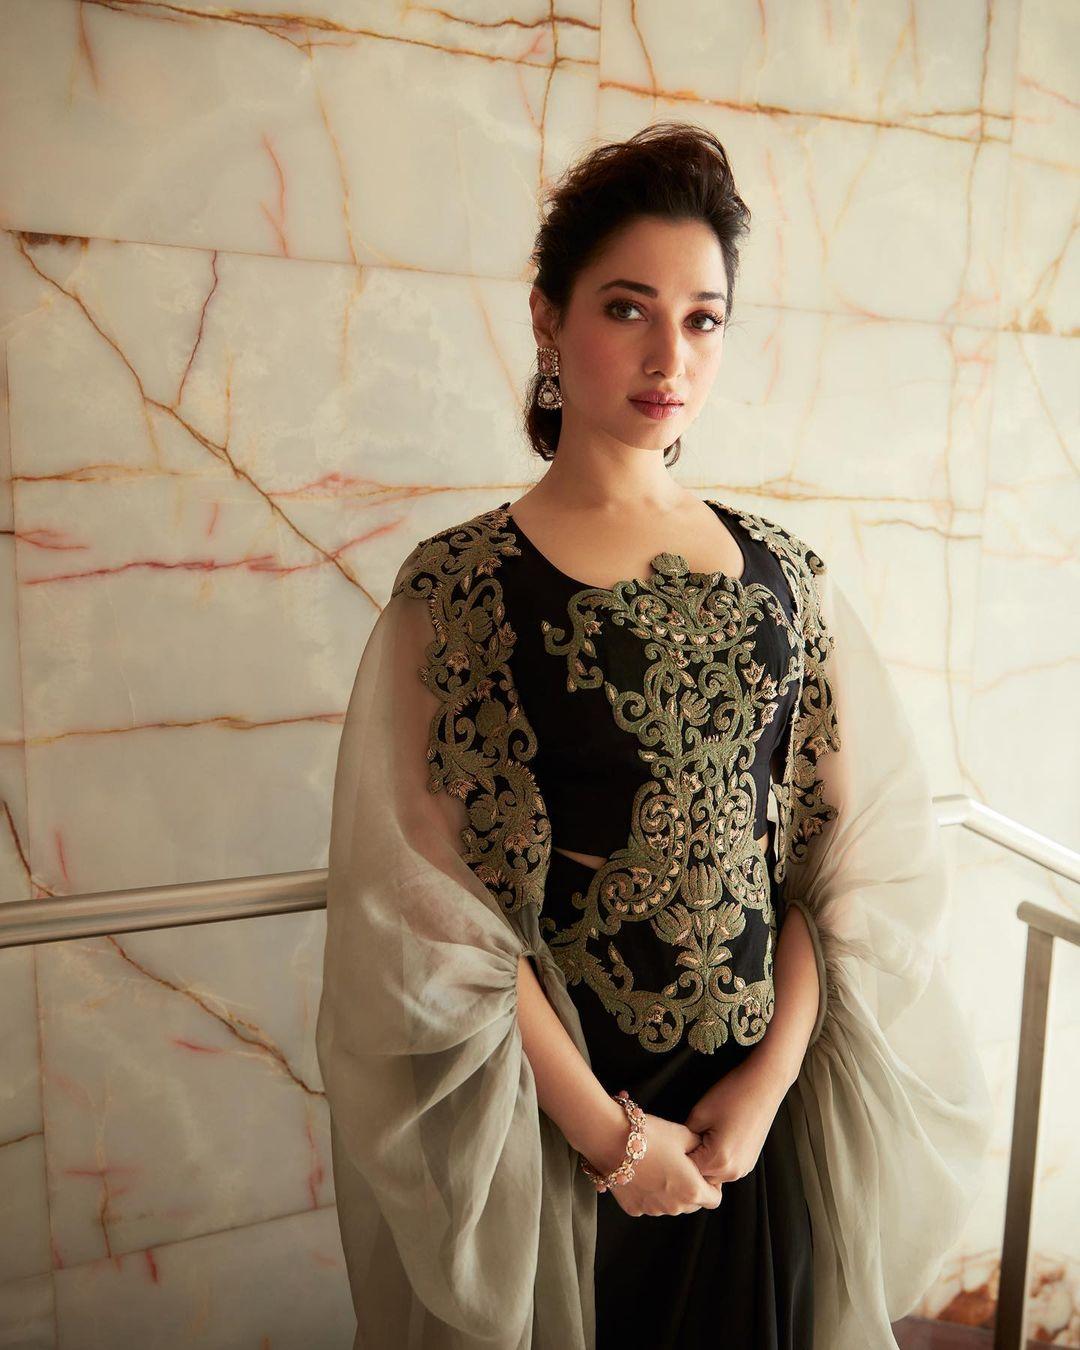 Tamannaah Bhatia absolutely rocked a blend of Indian and Western styles with her outfit. The ensemble stood out with beautiful threadwork that enhanced the overall look of the otherwise monochromatic outfit.